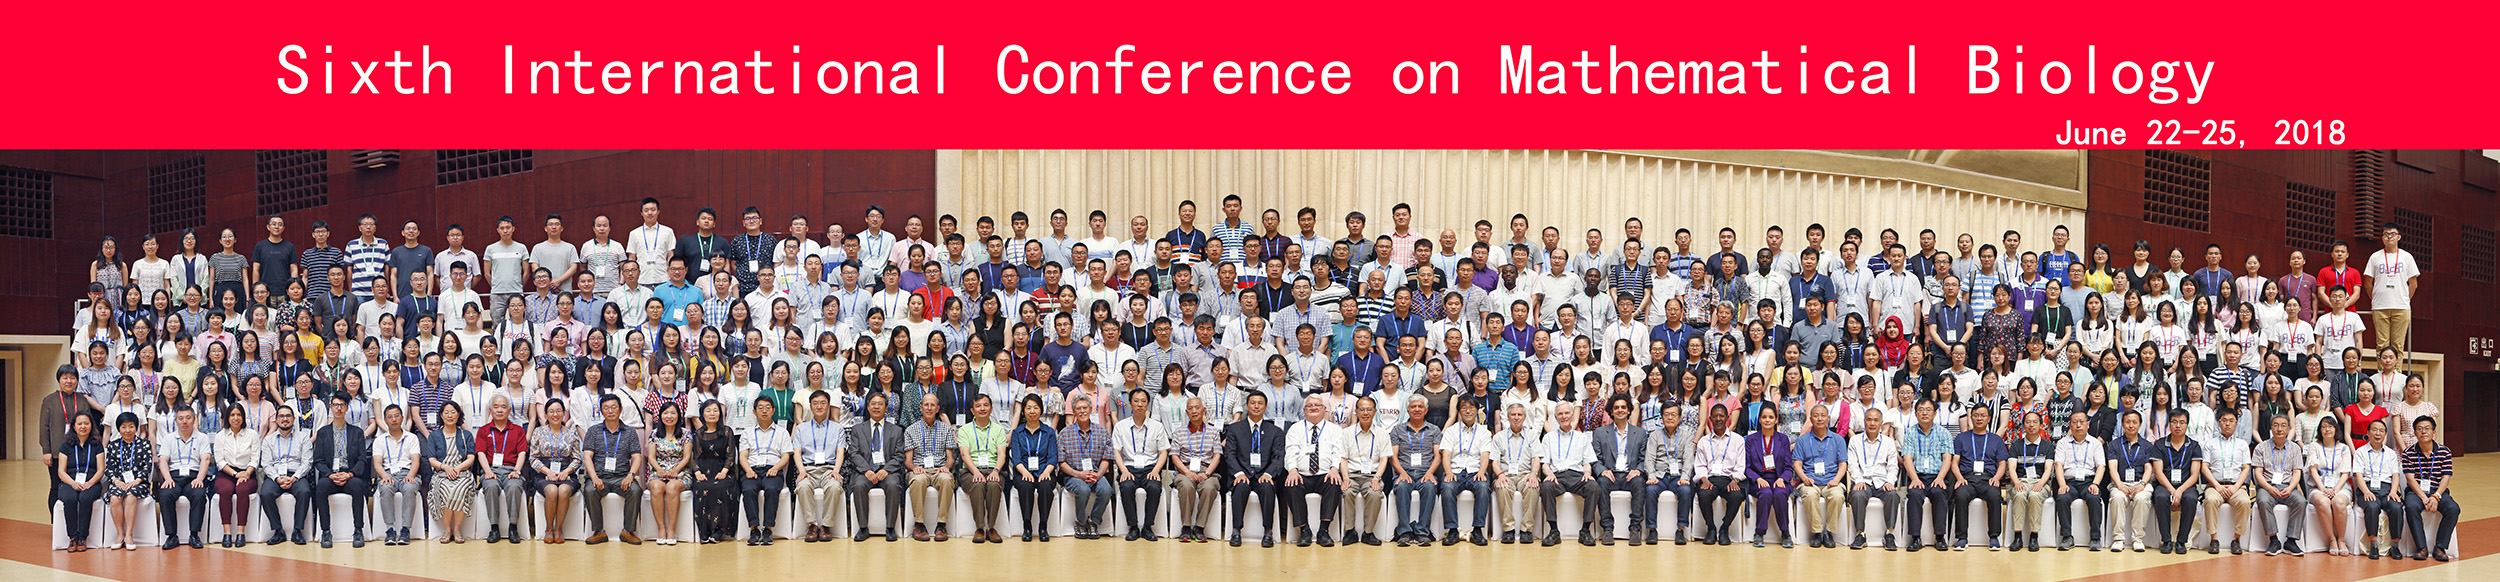 Sixth International Conference on Mathematical Biology group